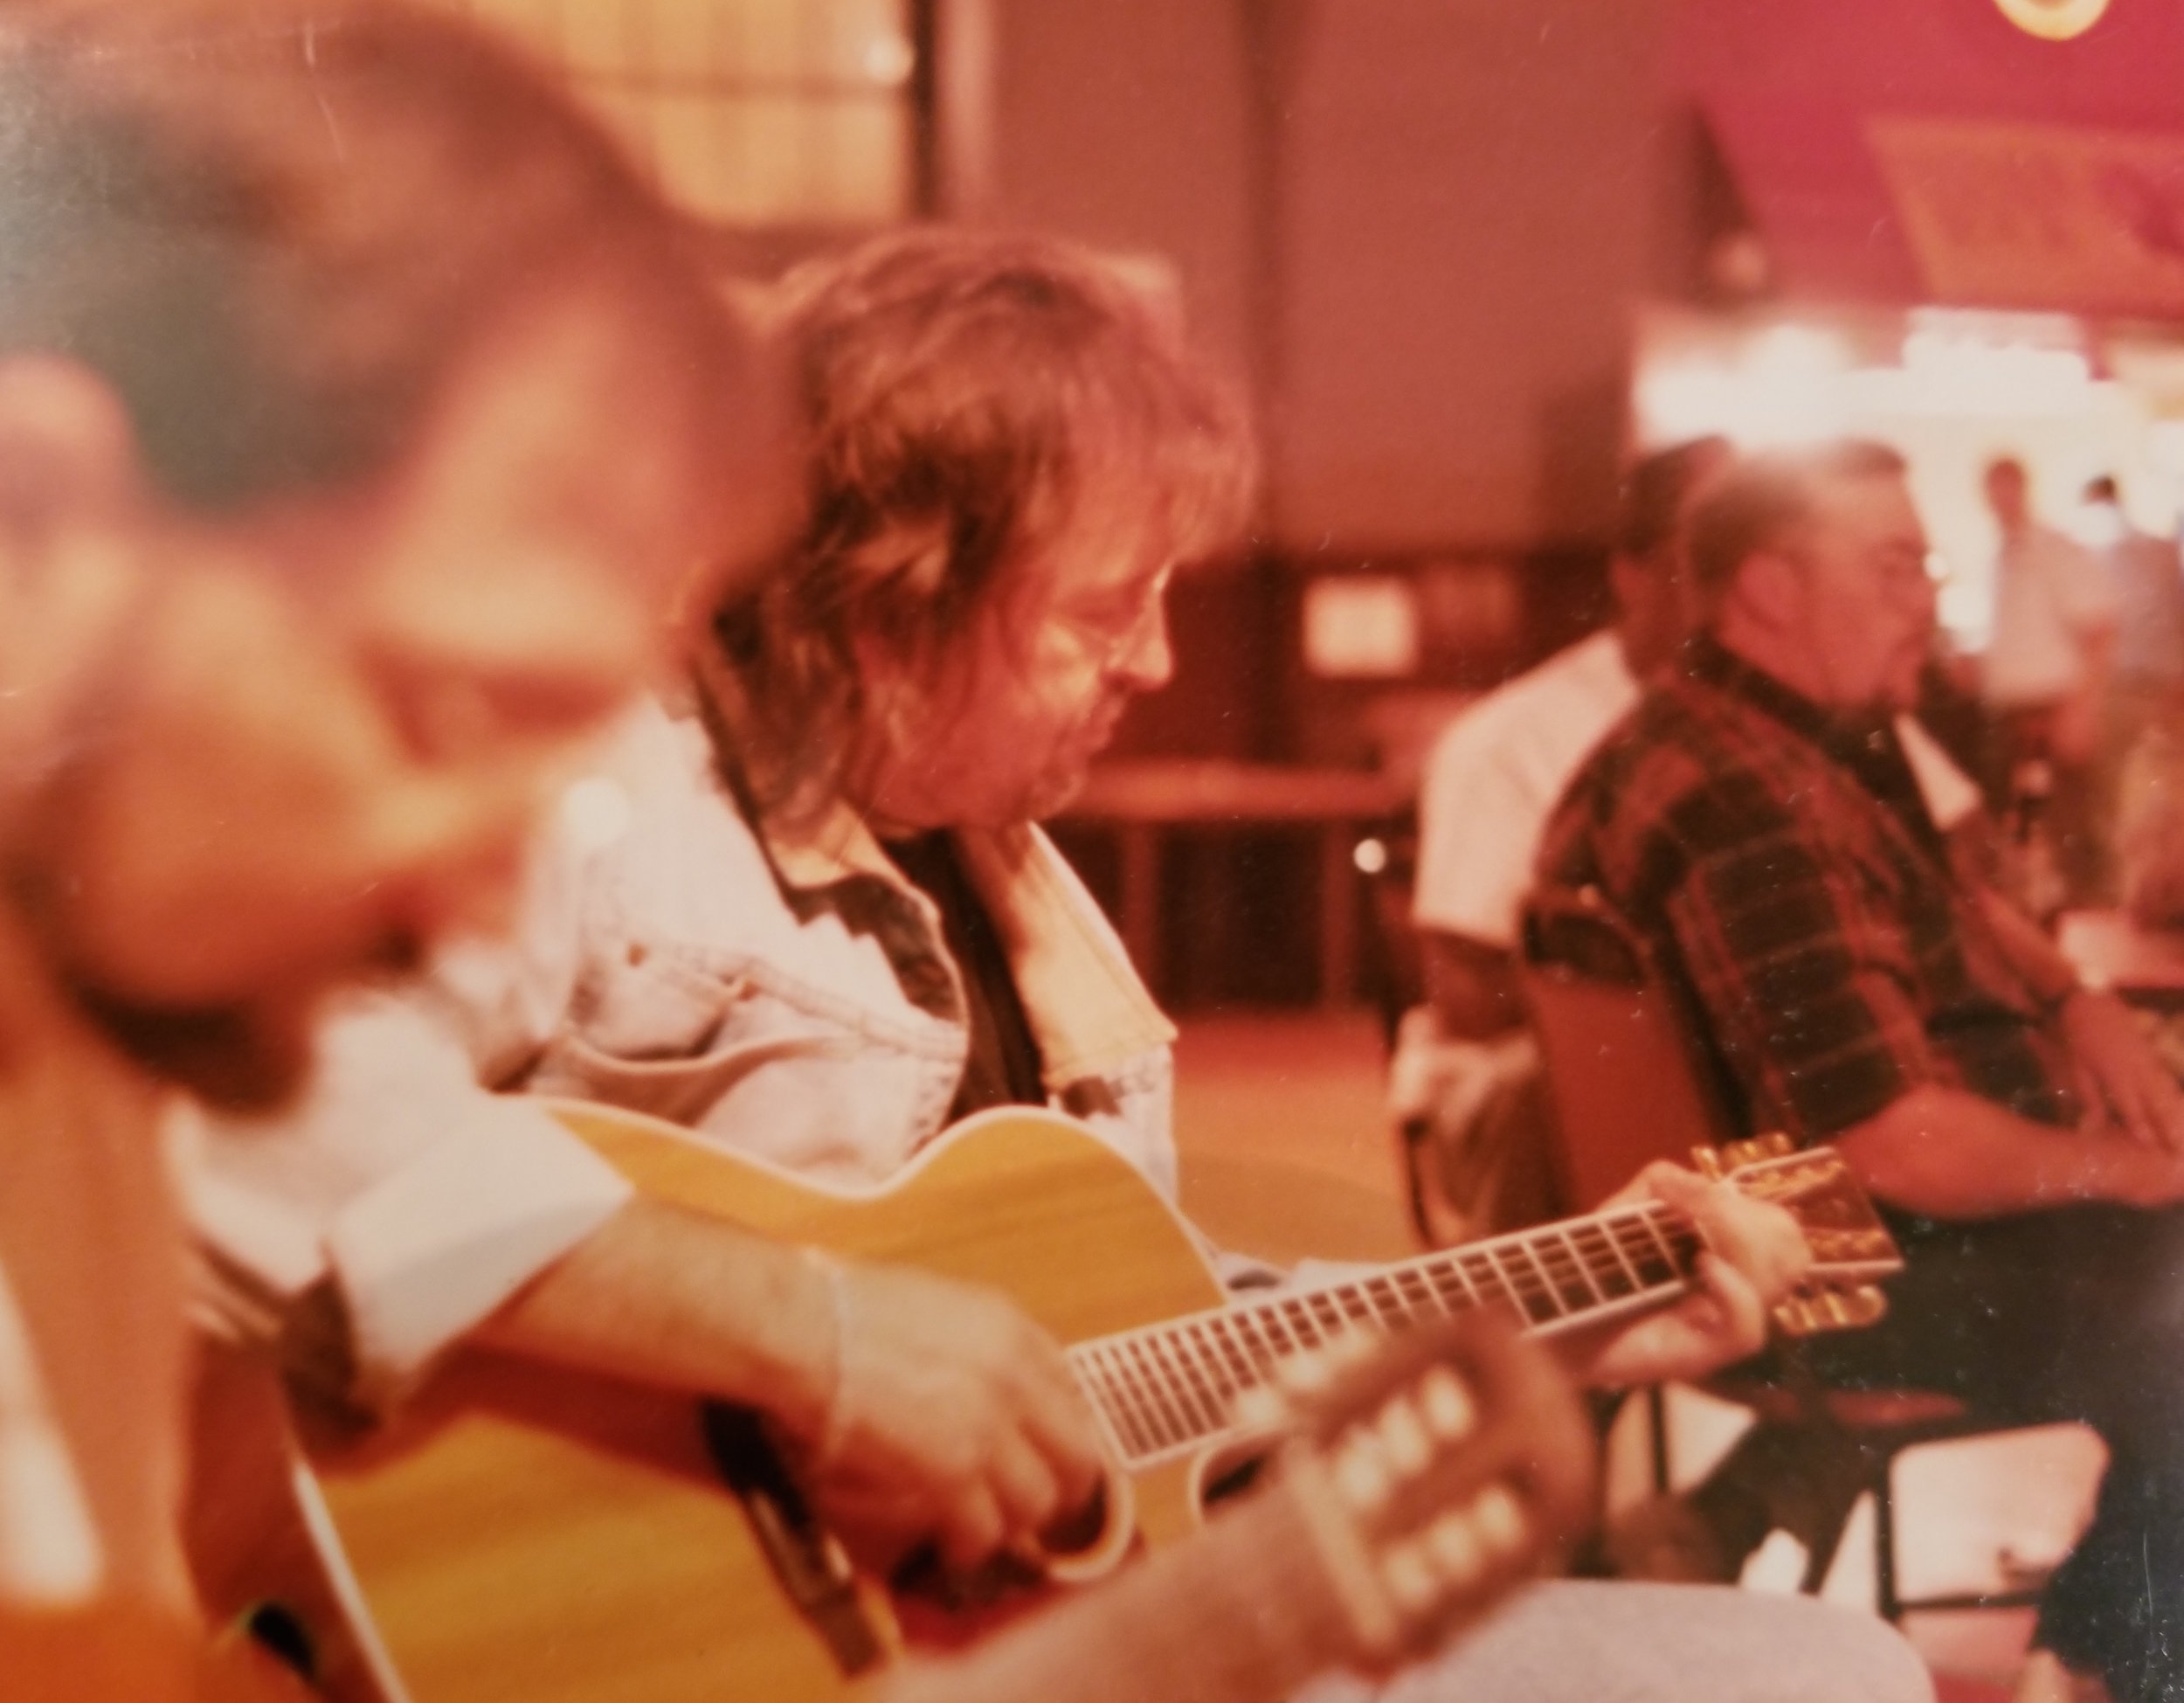  Ray Wylie Hubbard participates in the campfire jam, circa 2004 